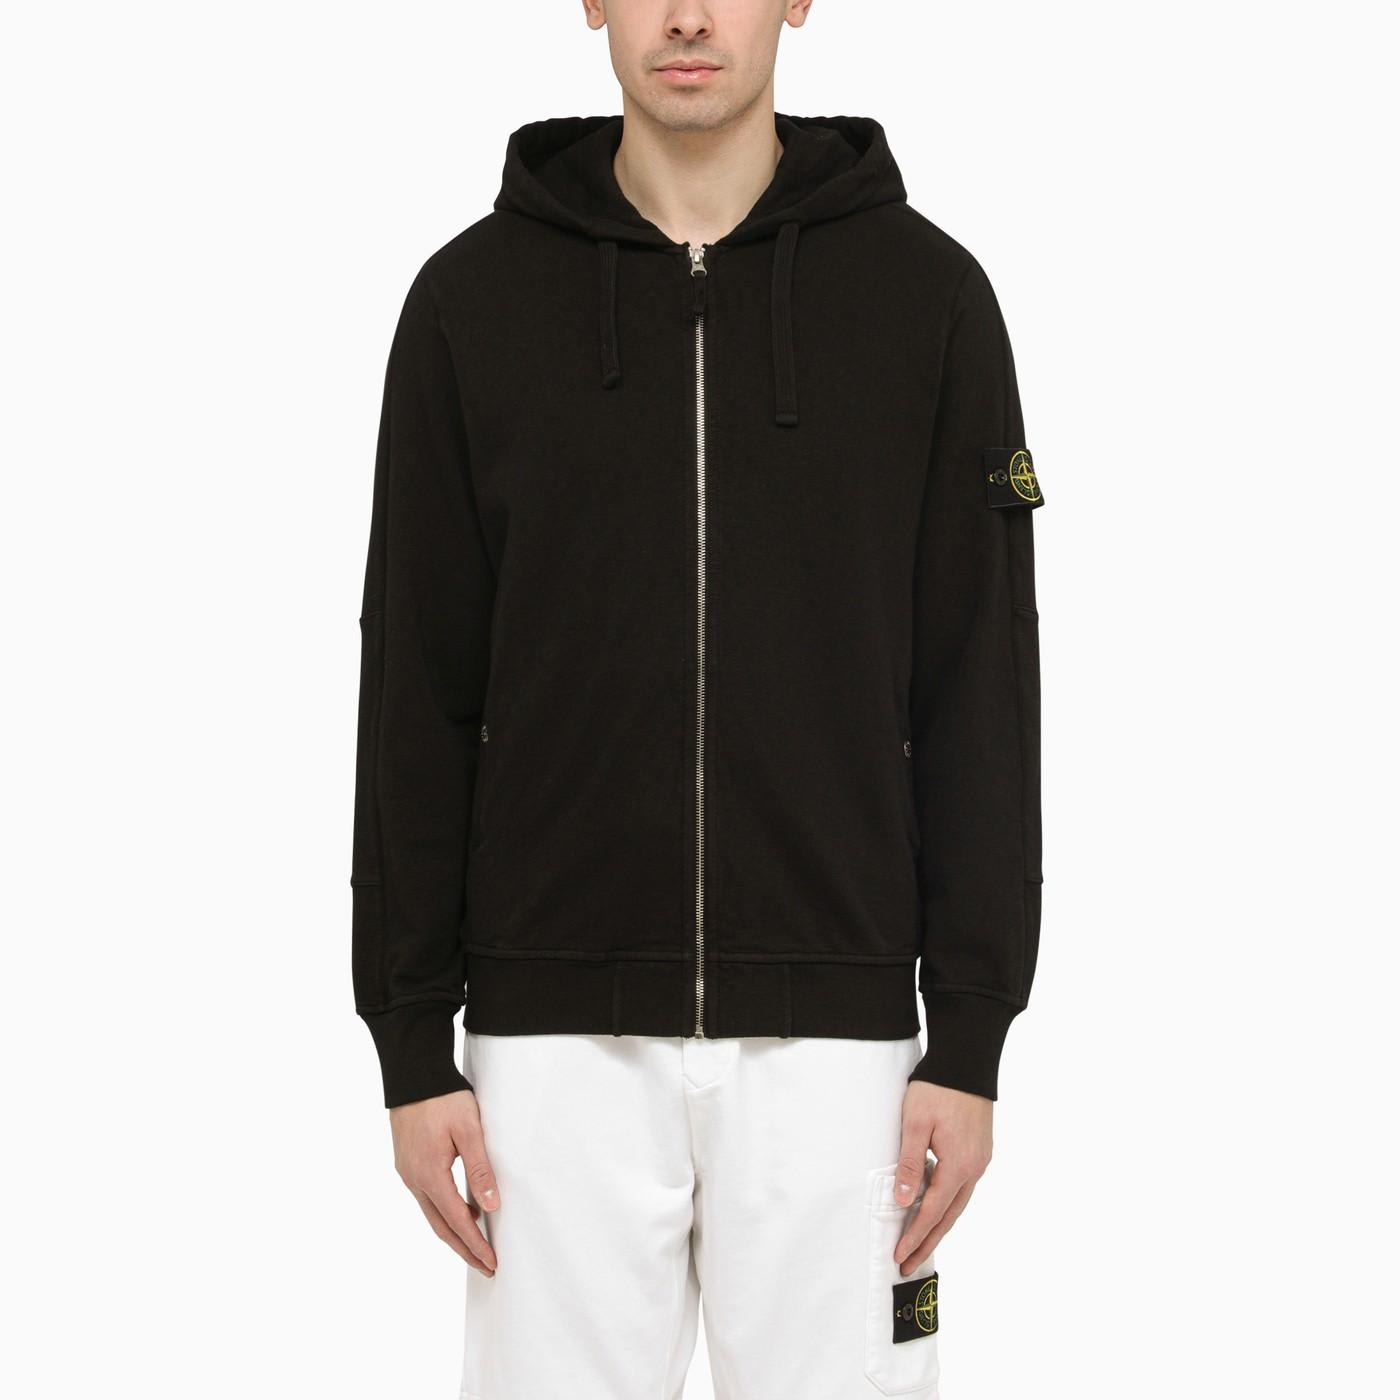 STONE ISLAND BLACK ZIP AND HOODIE WITH LOGO